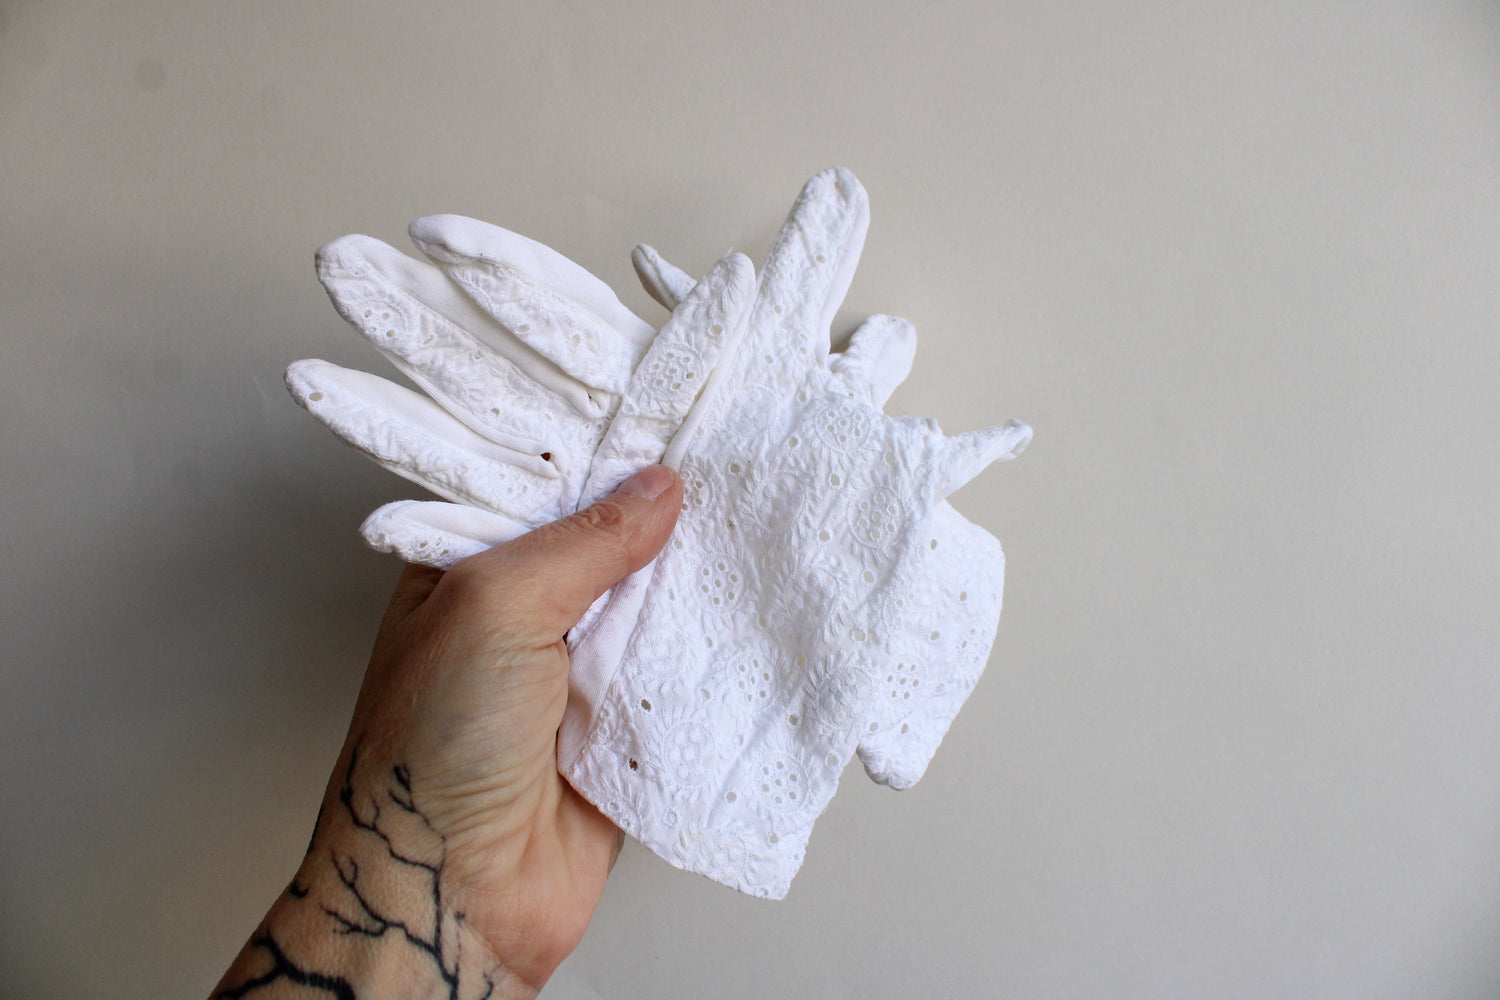 Vintage 1950s 1960s White Gloves with Floral Eyelet